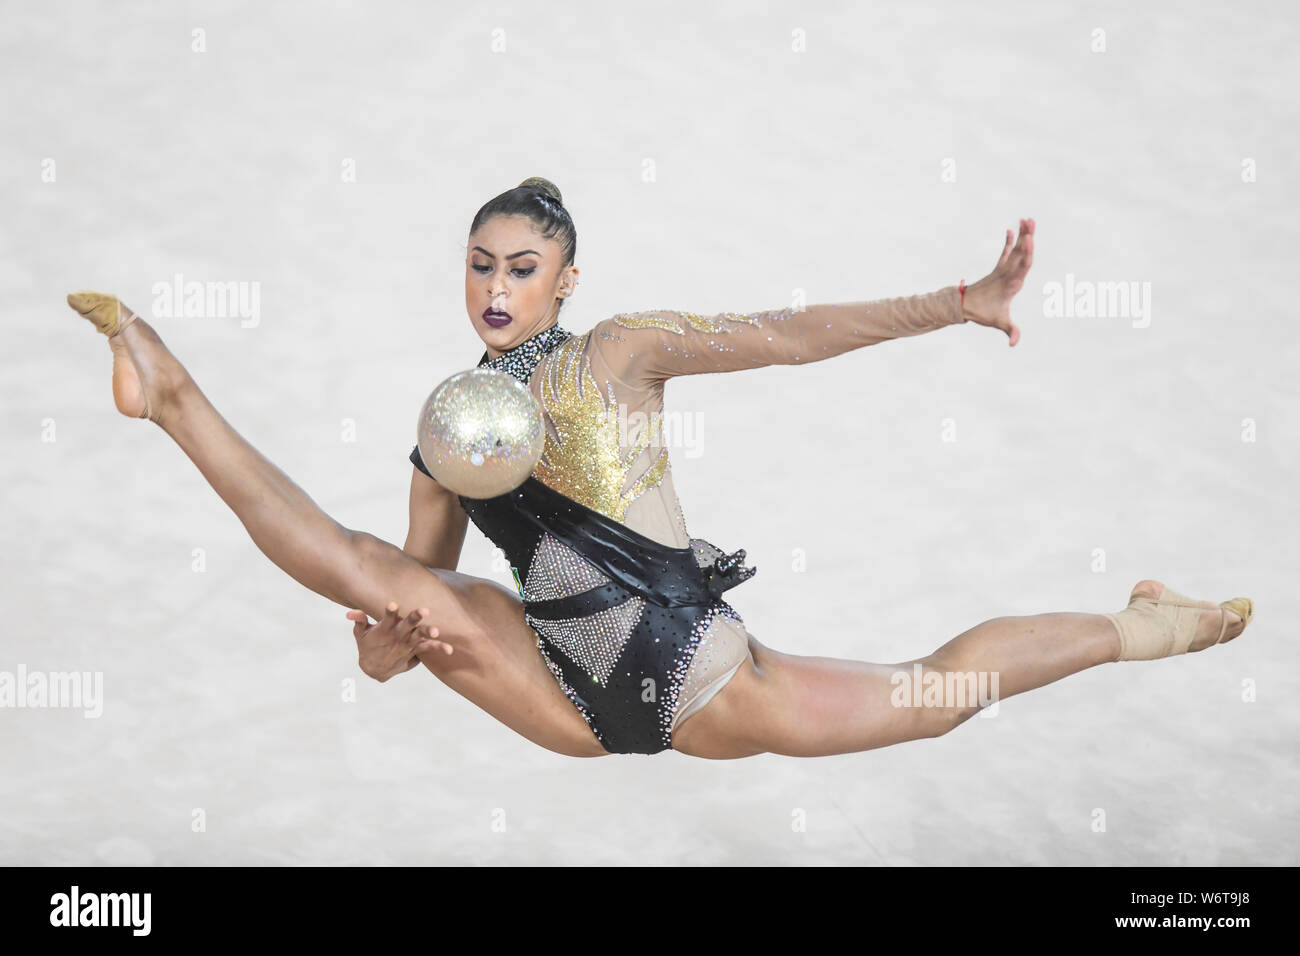 Lima, Peru. 2nd Aug, 2019. BARBARA DOMINGOS from Brazil competes in the individual All-Around with the ball during the competition held in the Polideportivo Villa El Salvador in Lima, Peru. Credit: Amy Sanderson/ZUMA Wire/Alamy Live News Stock Photo